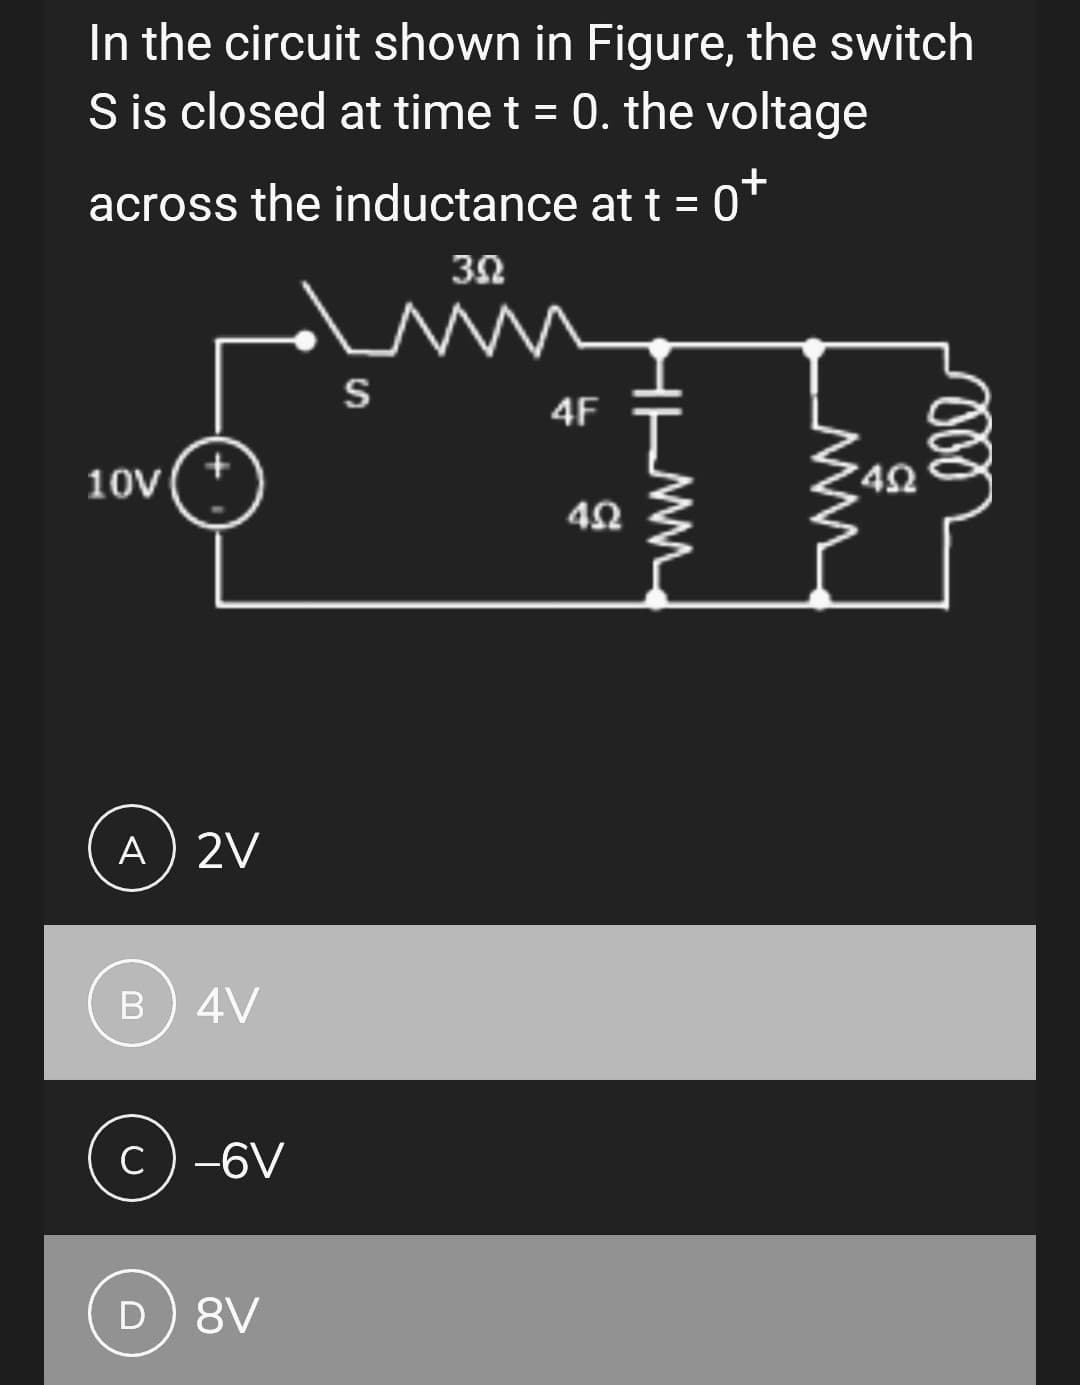 In the circuit shown in Figure, the switch
S is closed at time t = 0. the voltage
across the inductance at t = 0+
3.02
10V
A) 2V
B 4V
c) -6V
D) 8V
S
4F
492
HIMM
WWW
49
ell